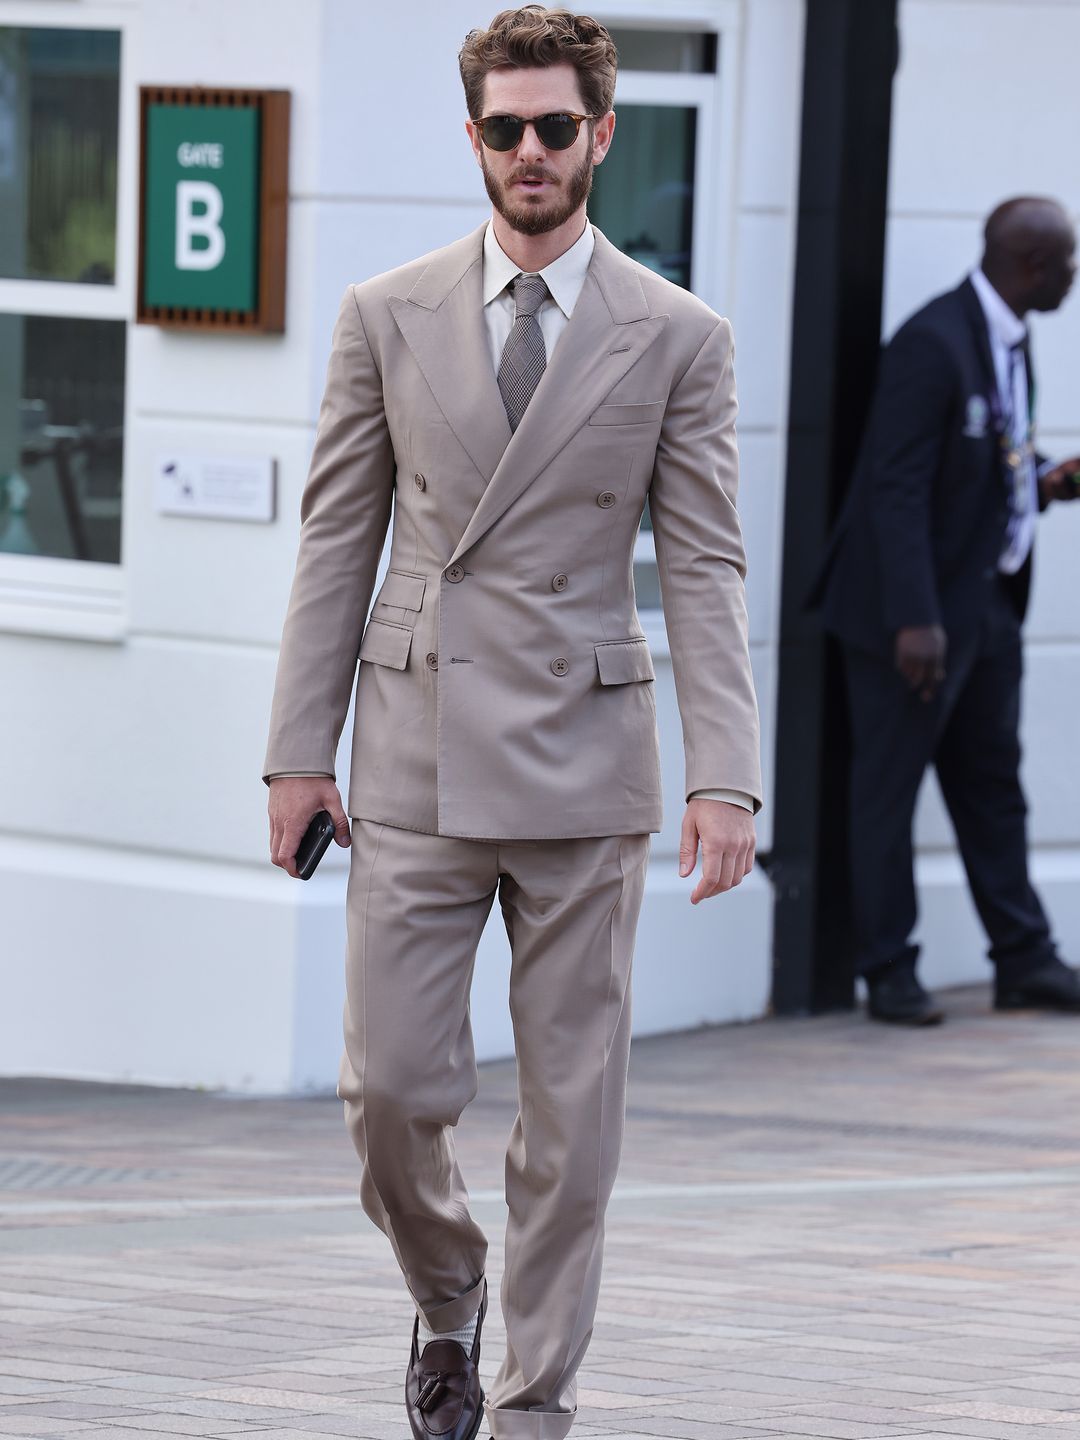 LONDON, ENGLAND - JULY 15: Andrew Garfield attends day thirteen of the Wimbledon Tennis Championships at All England Lawn Tennis and Croquet Club on July 15, 2023 in London, England. (Photo by Neil Mockford/GC Images)